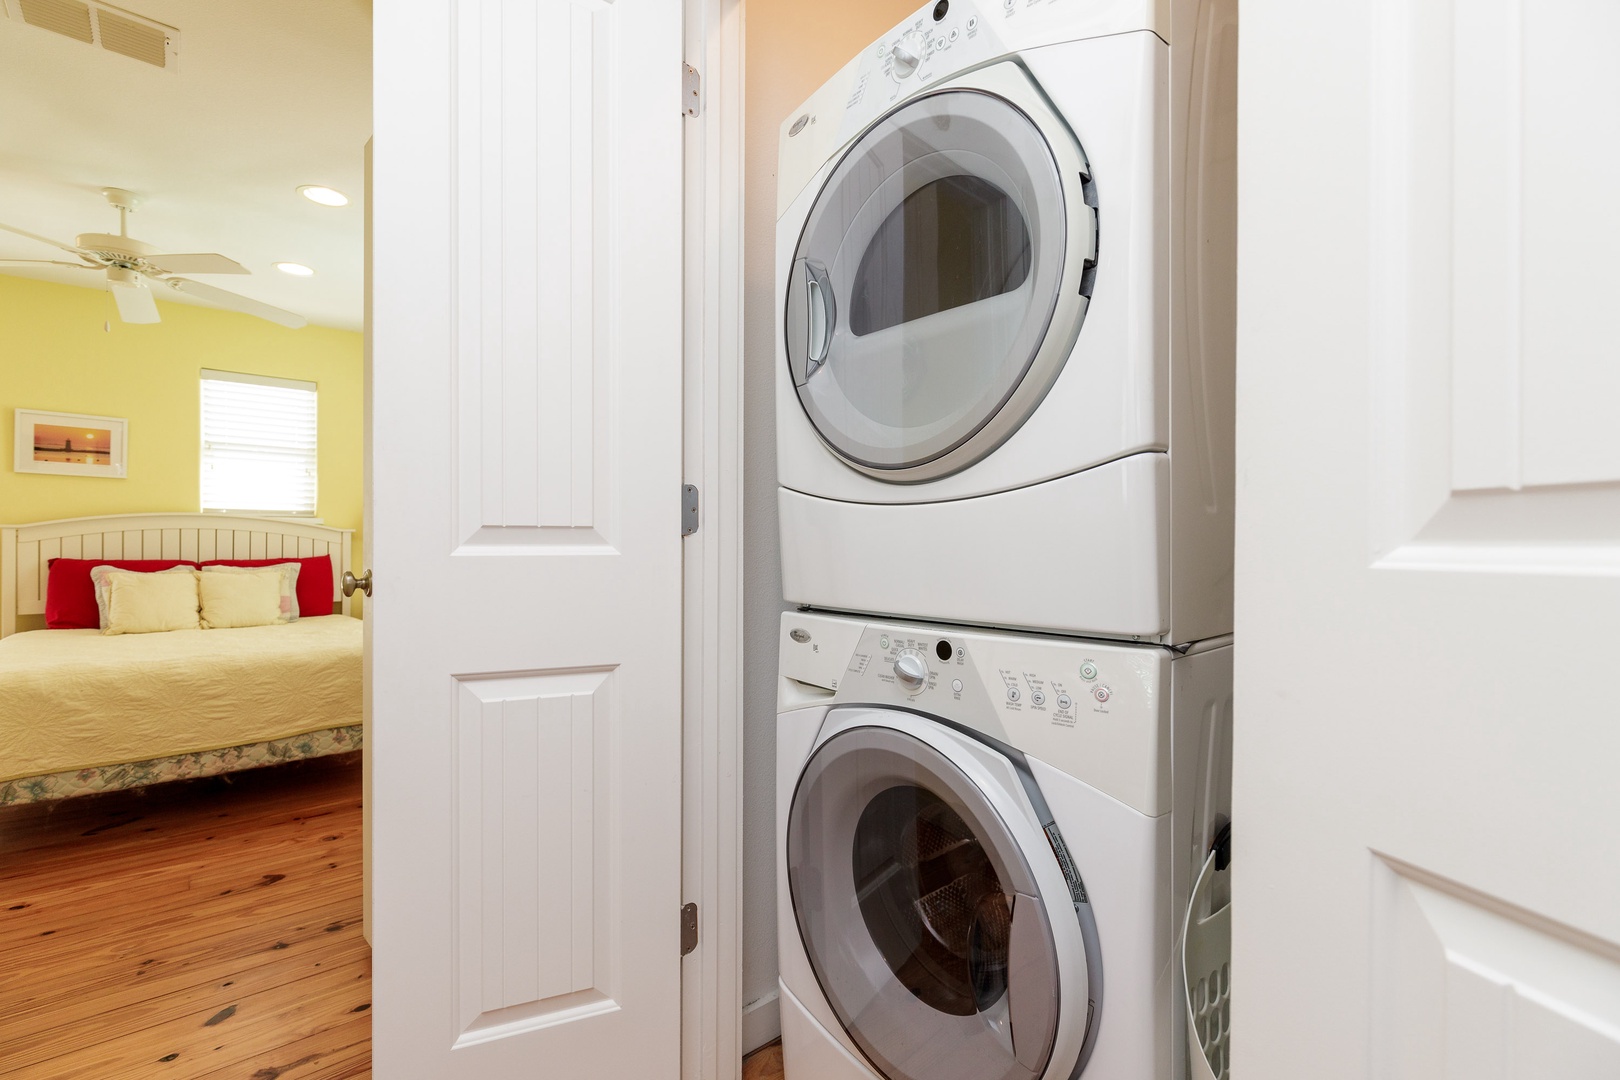 Private laundry is available for your stay